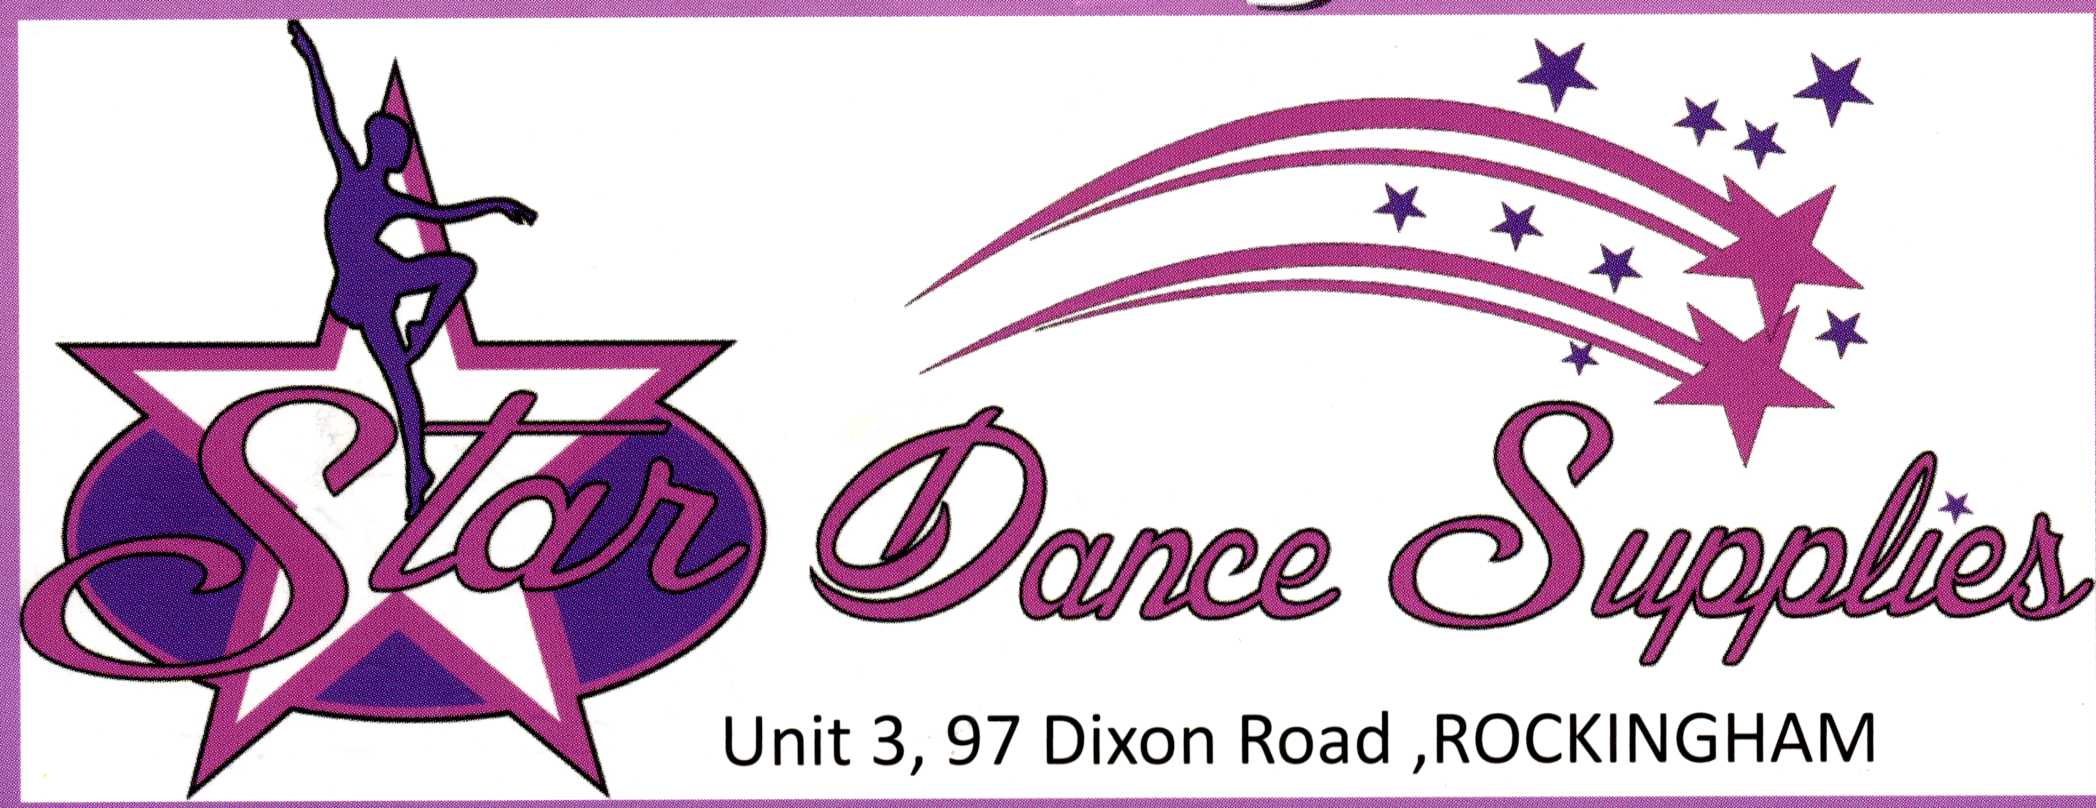 STAR DANCE SUPPLIES ⭐ AFFORDABLE DANCE SUPPLIES AND ACCESSORIES